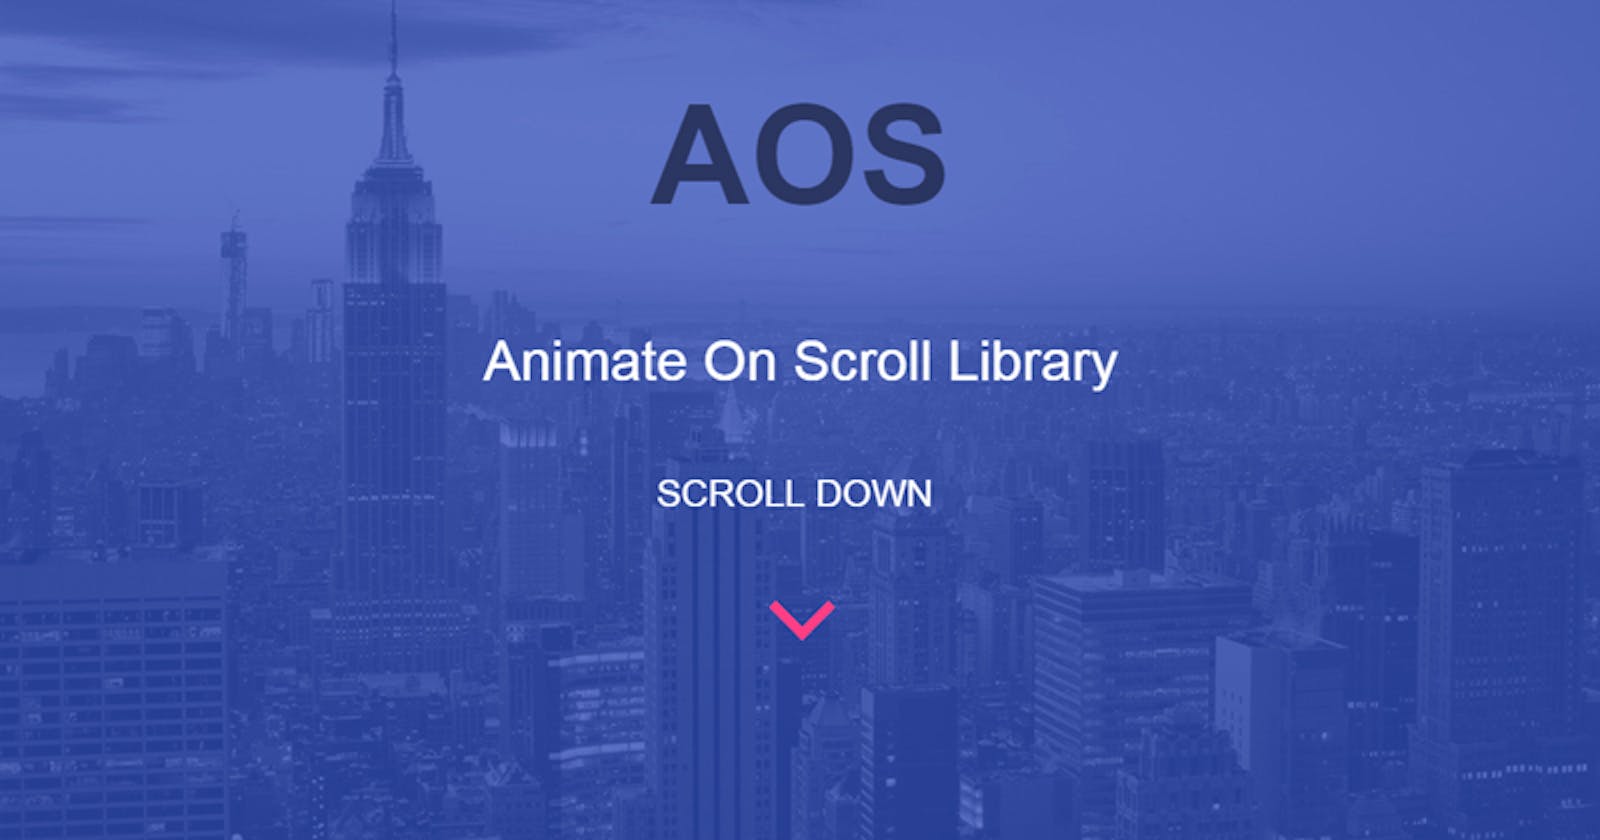 How to Implement Animate on Scroll in Angular Web Apps - Using the AOS Library